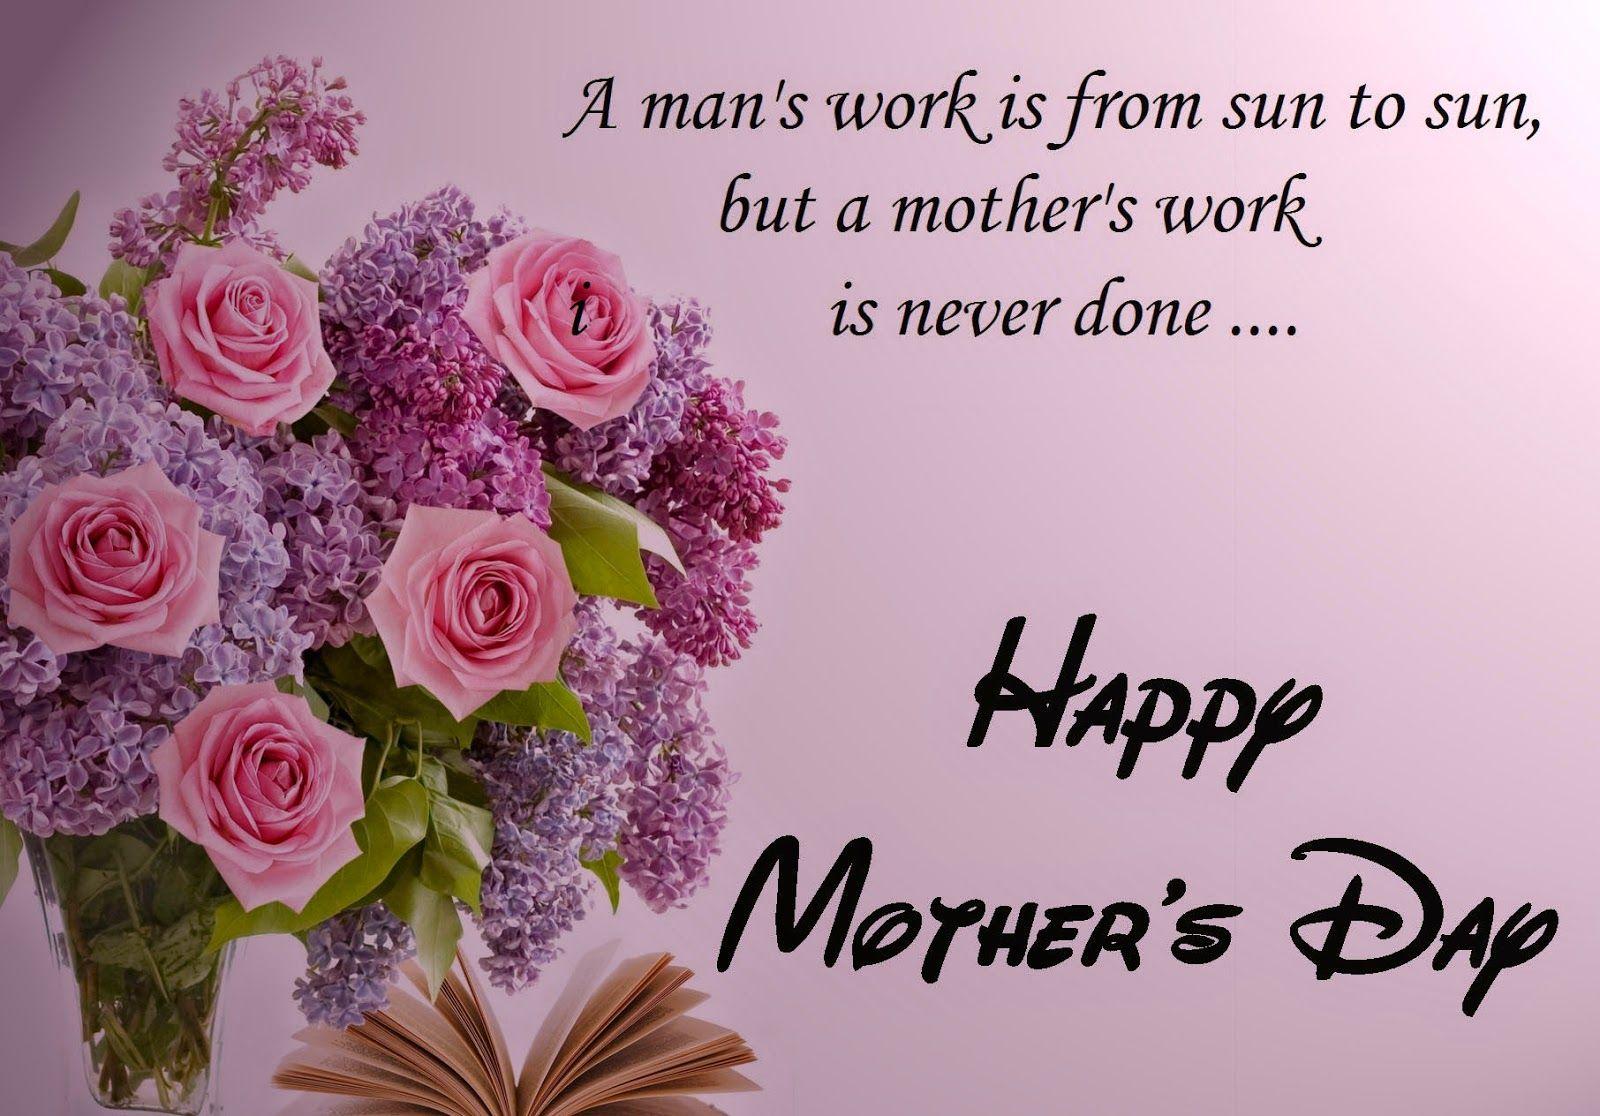 Happy Mother's Day 2018 Wallpapers - Wallpaper Cave